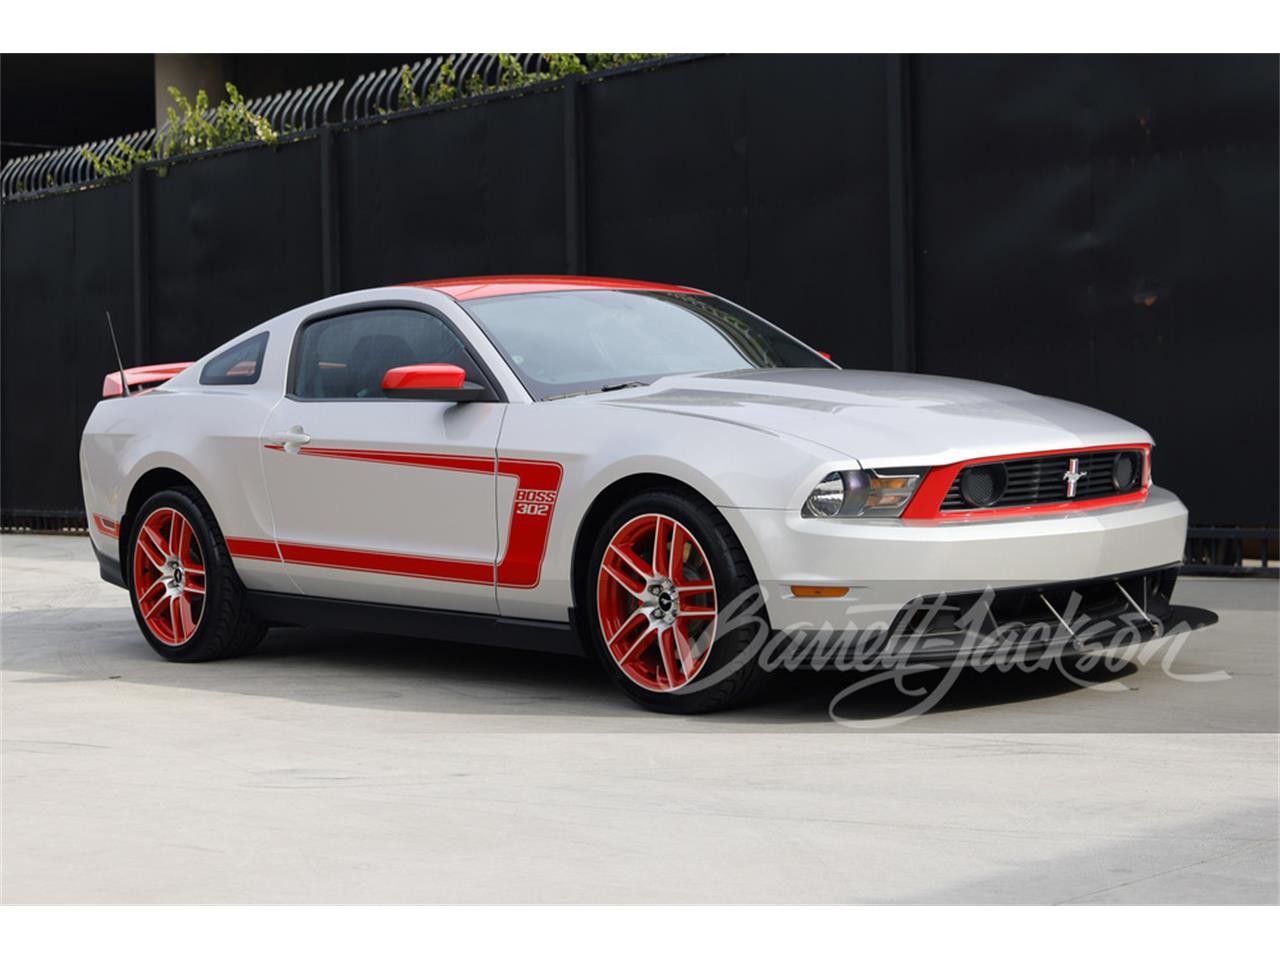 For Sale at Auction: 2012 Ford Mustang Boss 302 in Scottsdale, Arizona for sale in Scottsdale, AZ